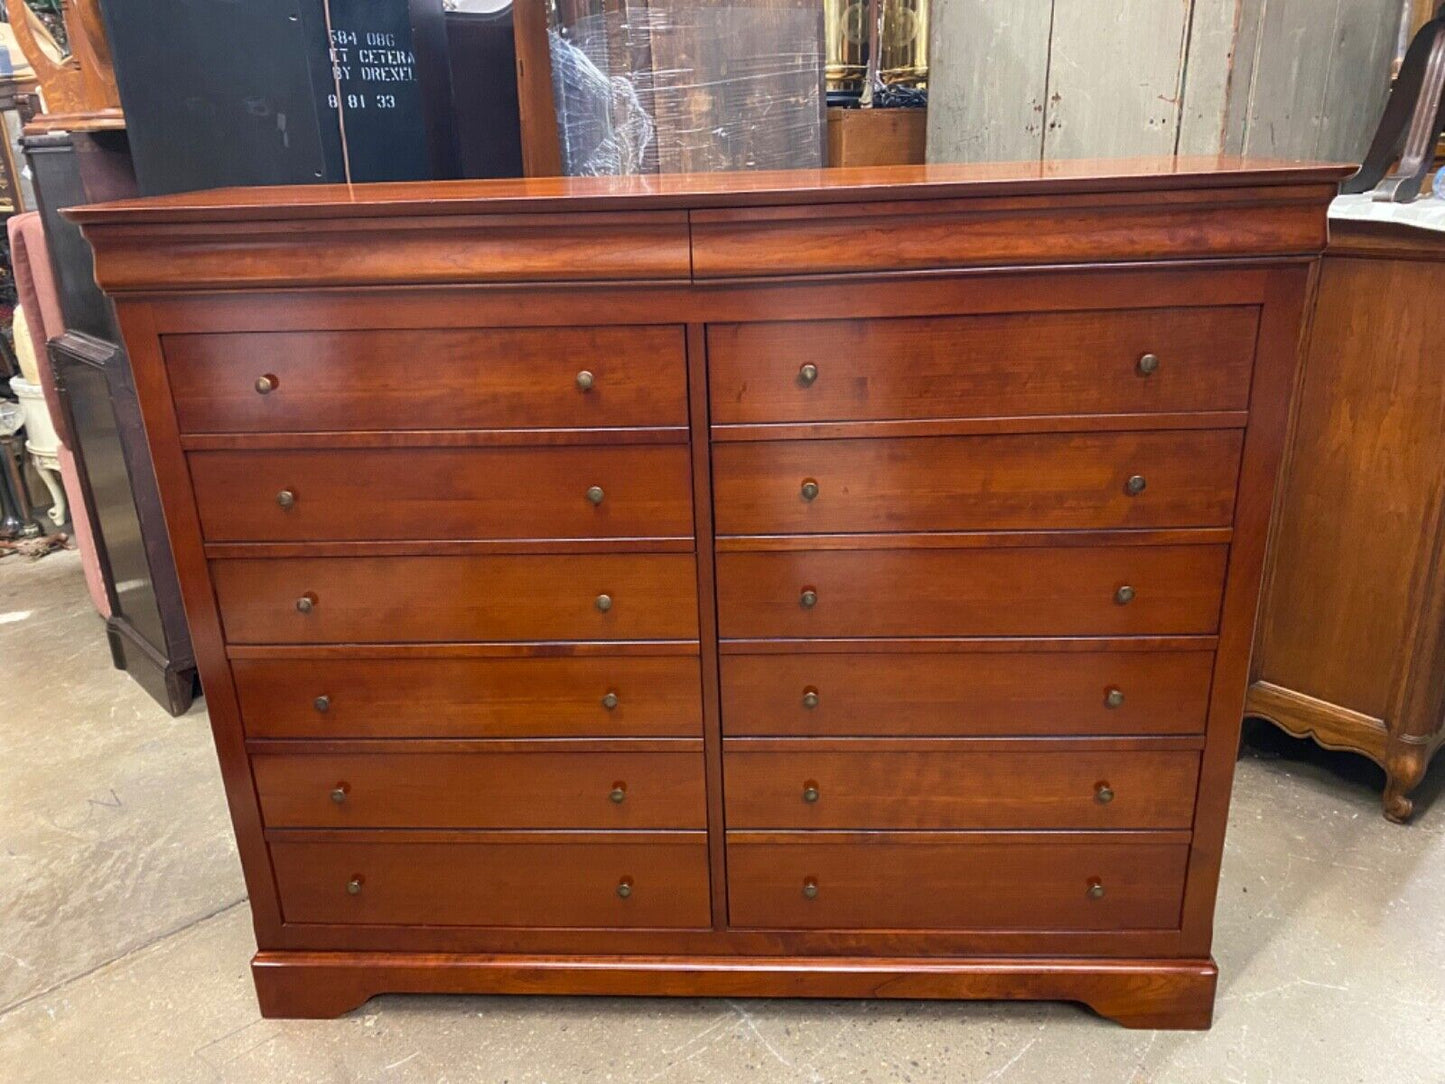 French Country Solid Cherry Wood 14 Drawer Tall Chest Dresser - Made in France